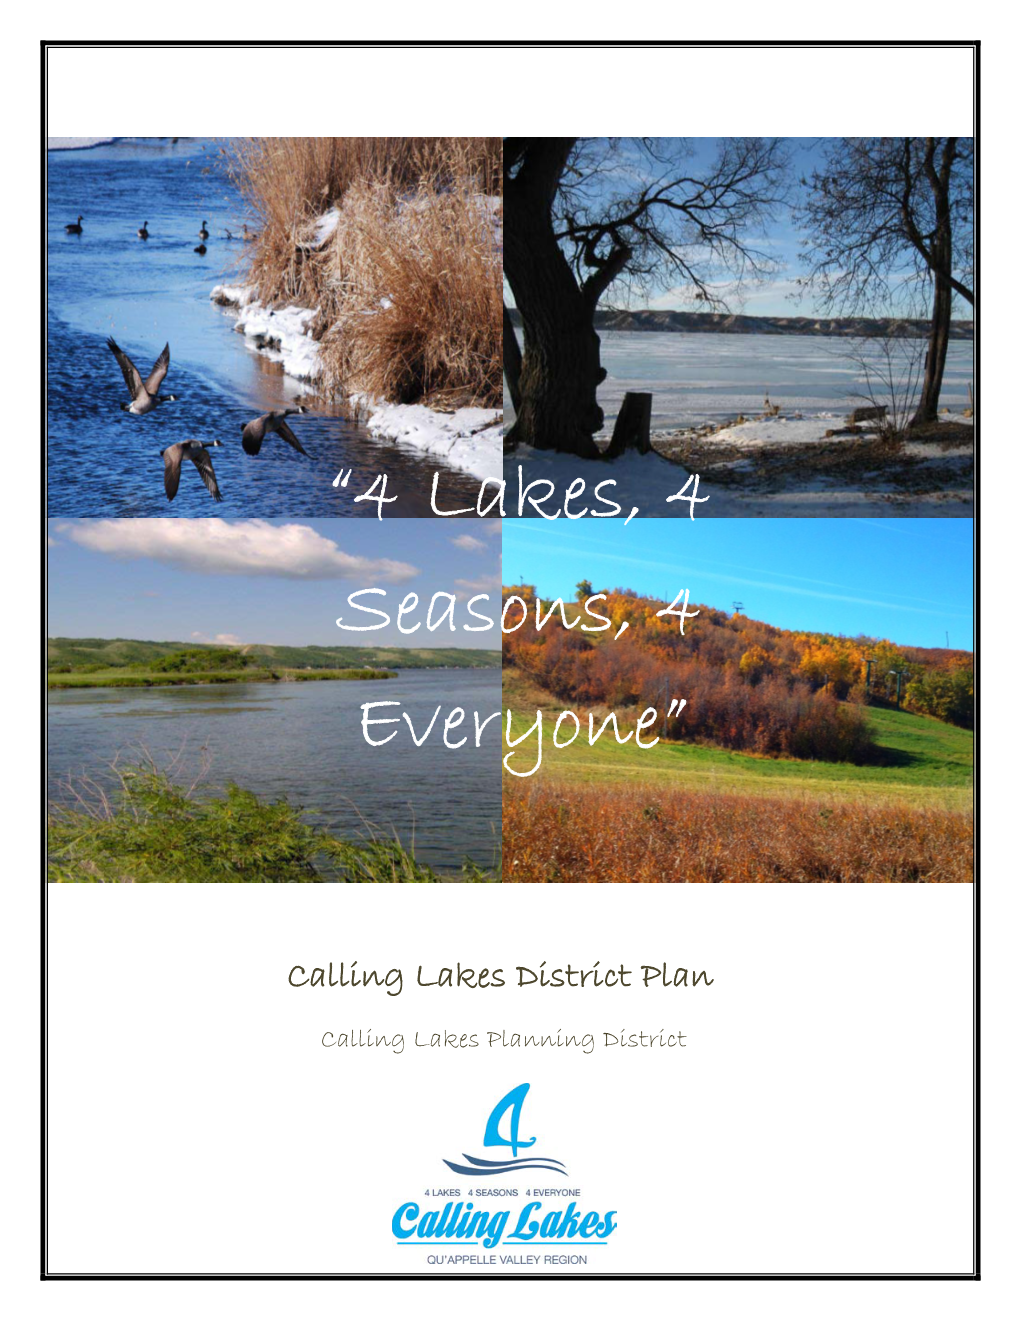 View the Calling Lakes District Plan